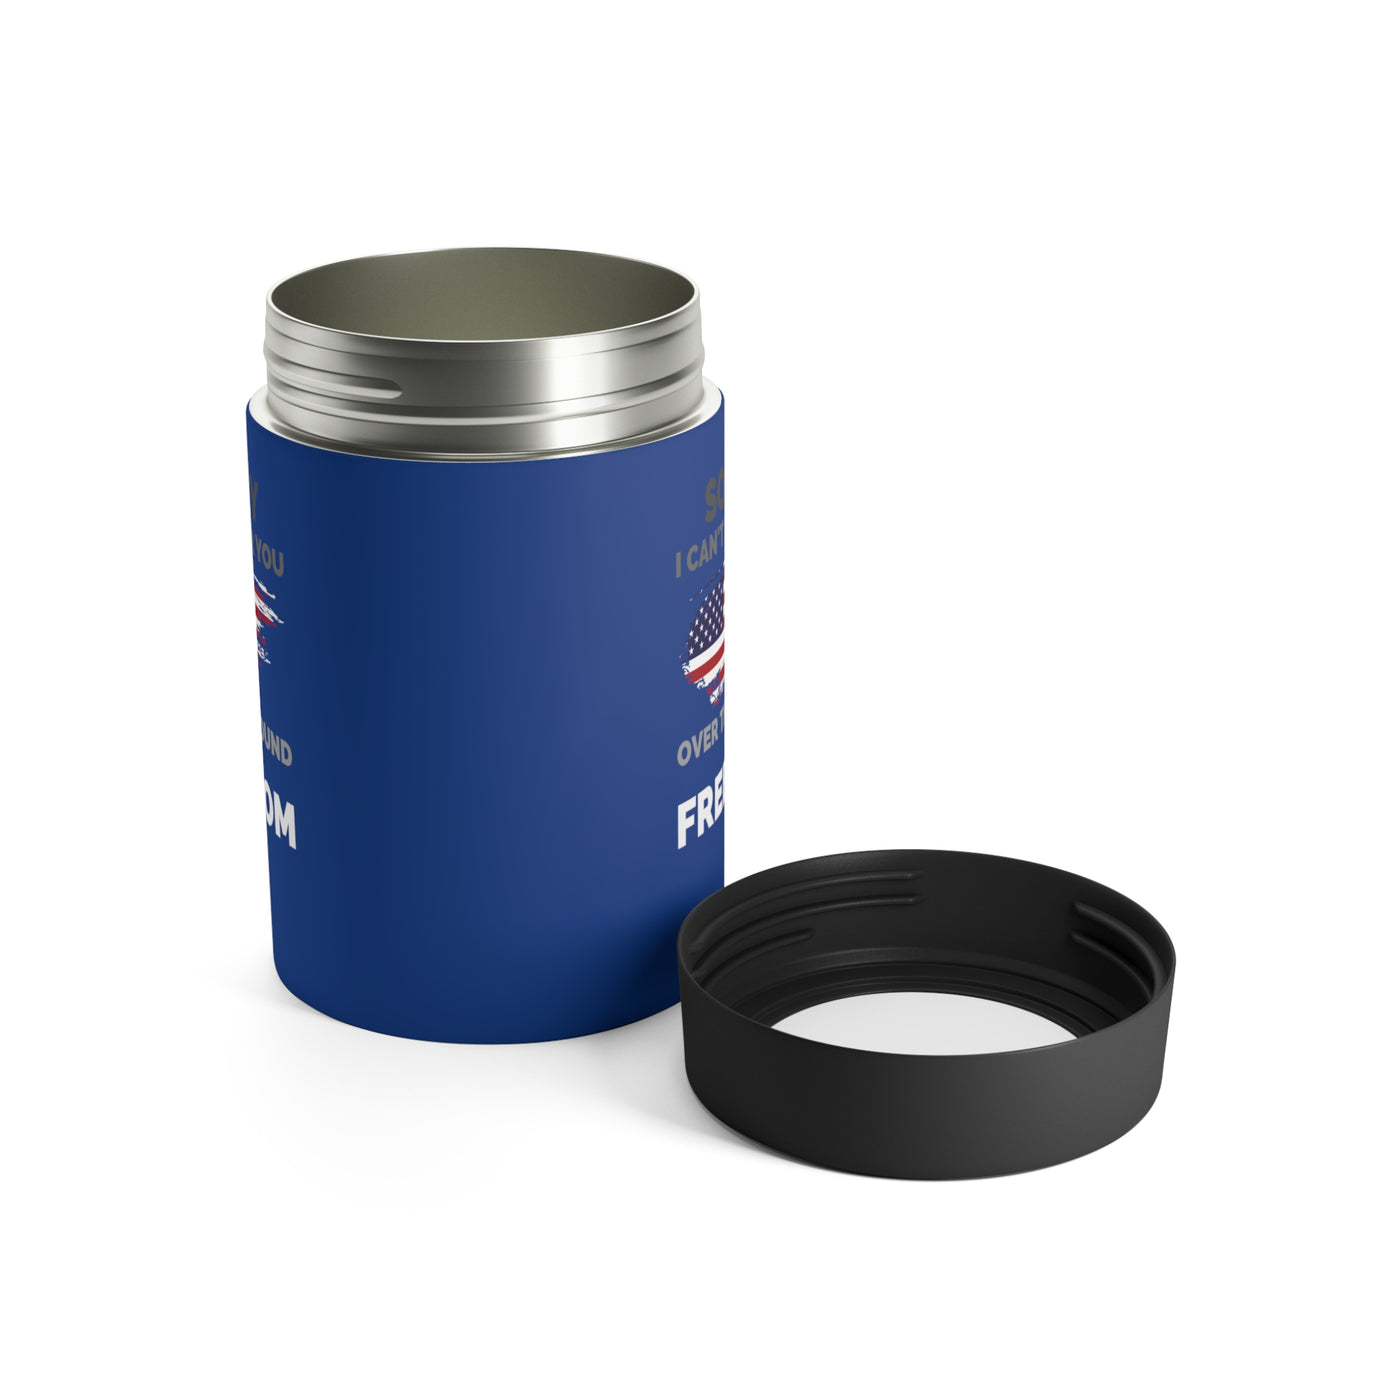 Sorry I Can't Hear You Over The Sound Of Freedom Stainless Steel Can Holder